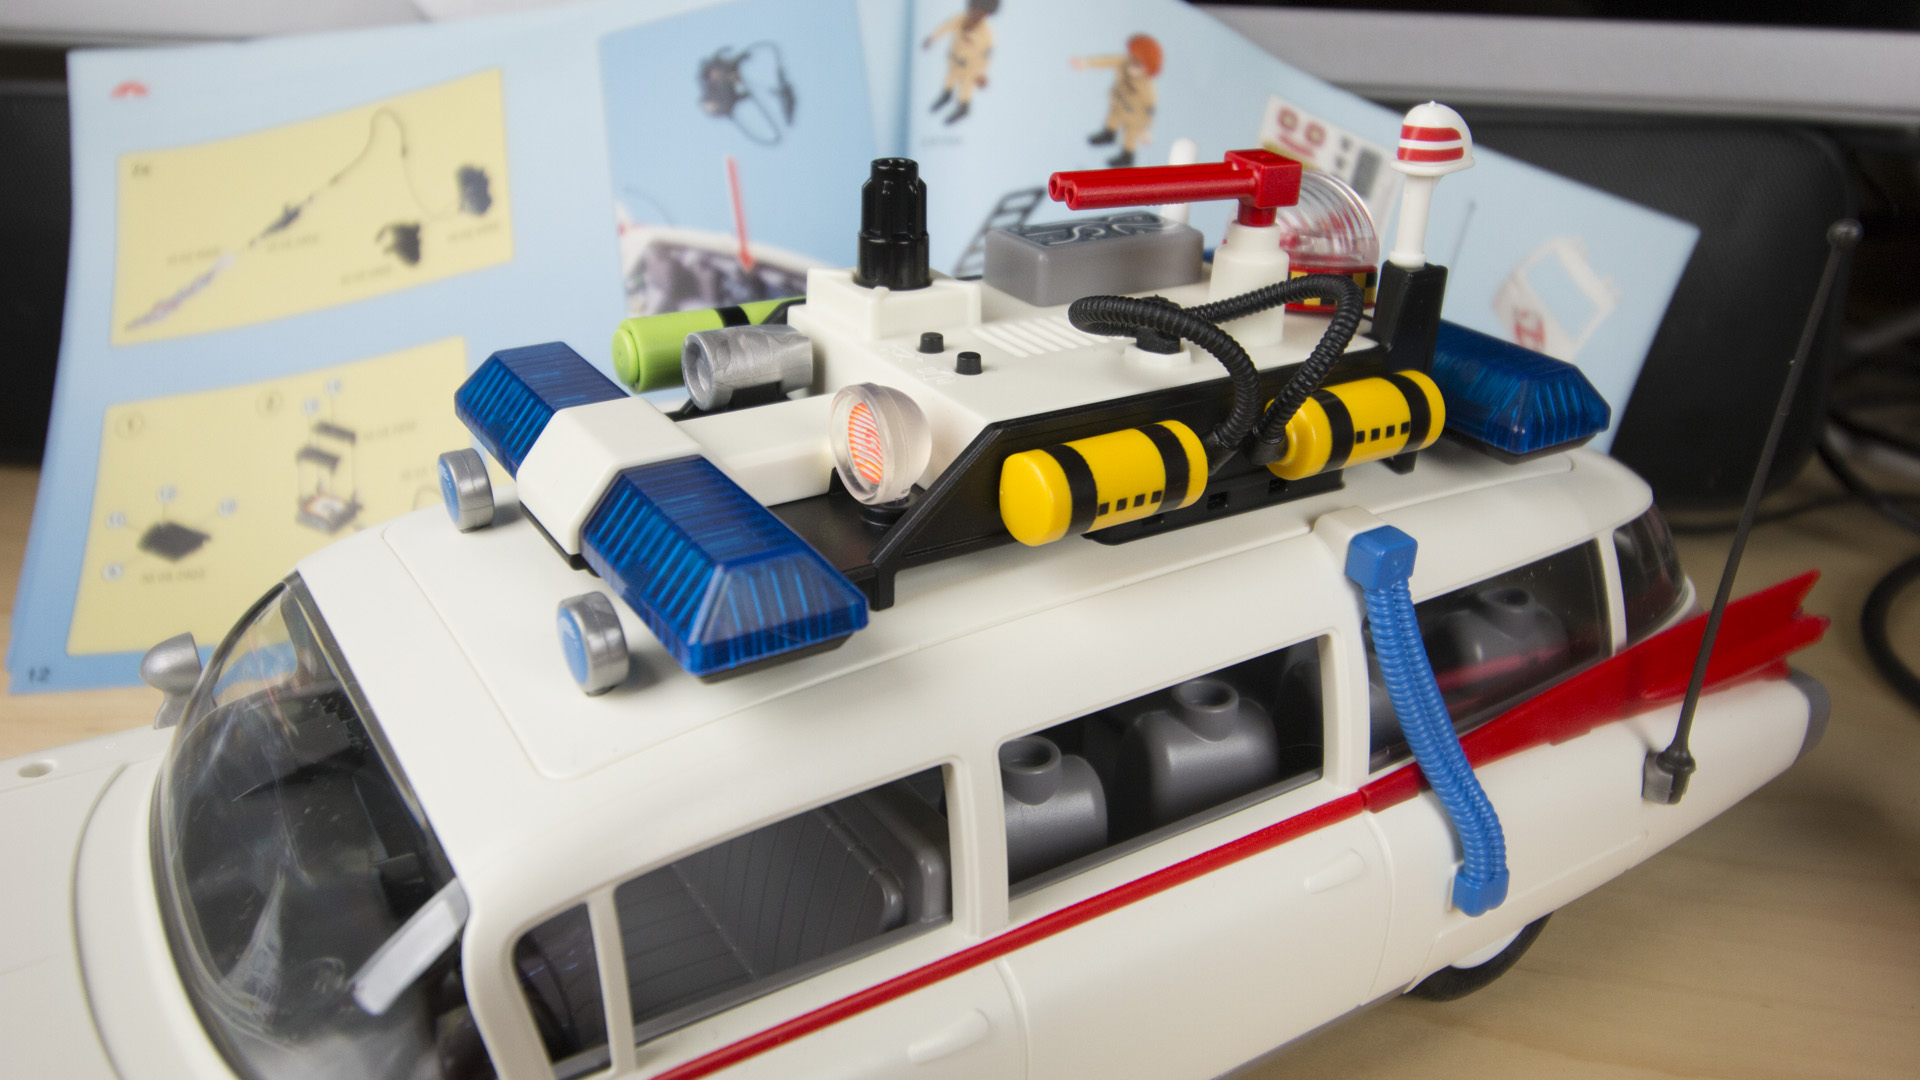 Toy Time Celebrates Ghostbusters Day With Playmobil’s Ecto-1